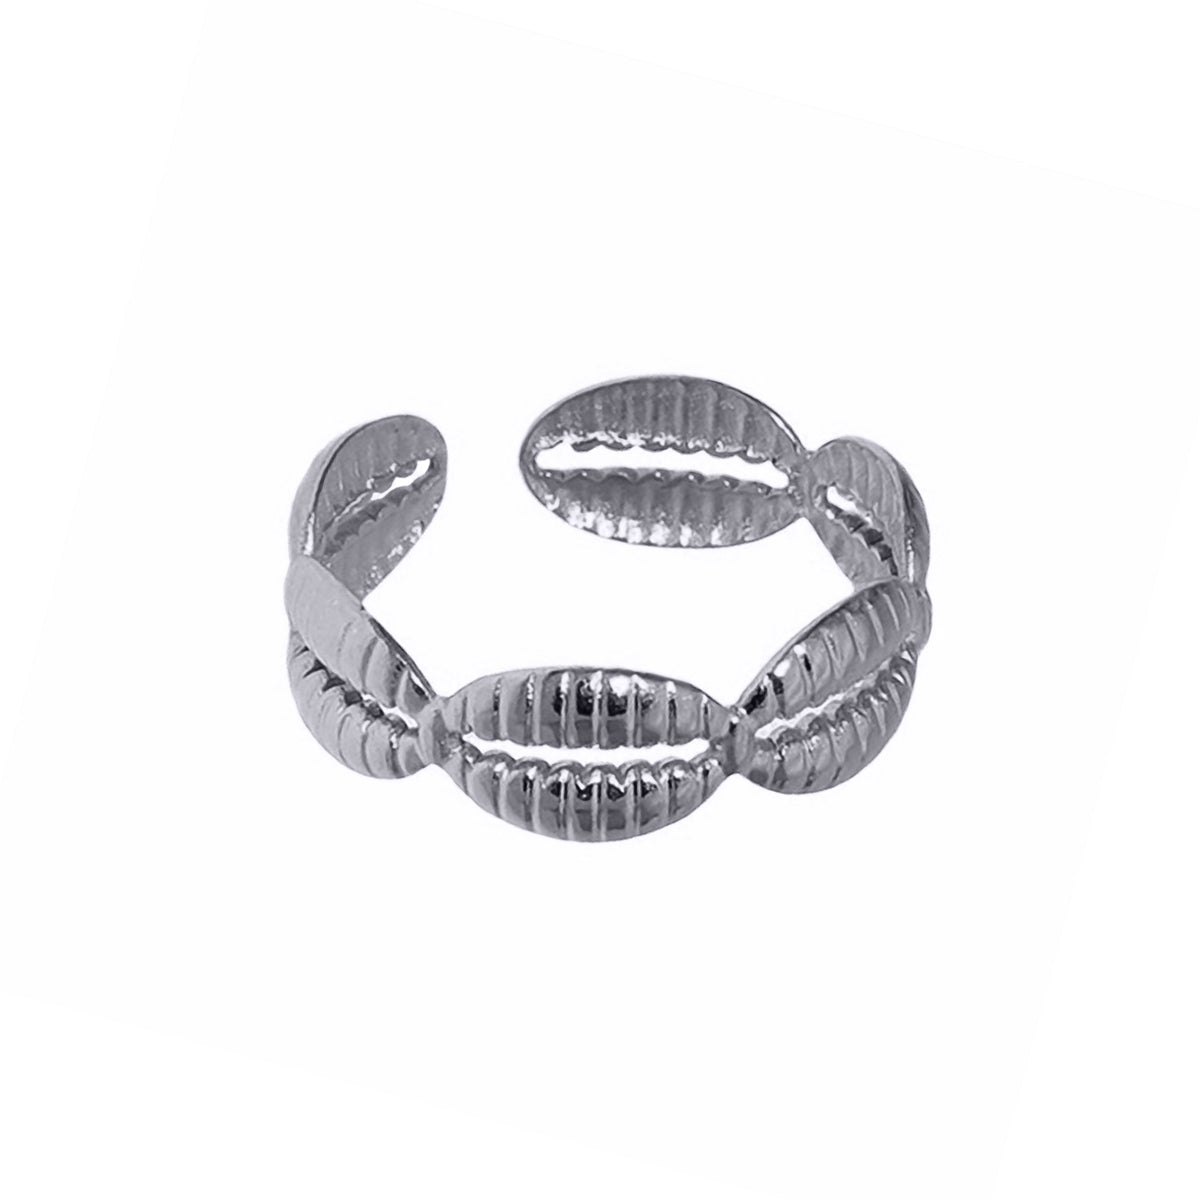 One-size clamshell steel ring (Steel 316L)